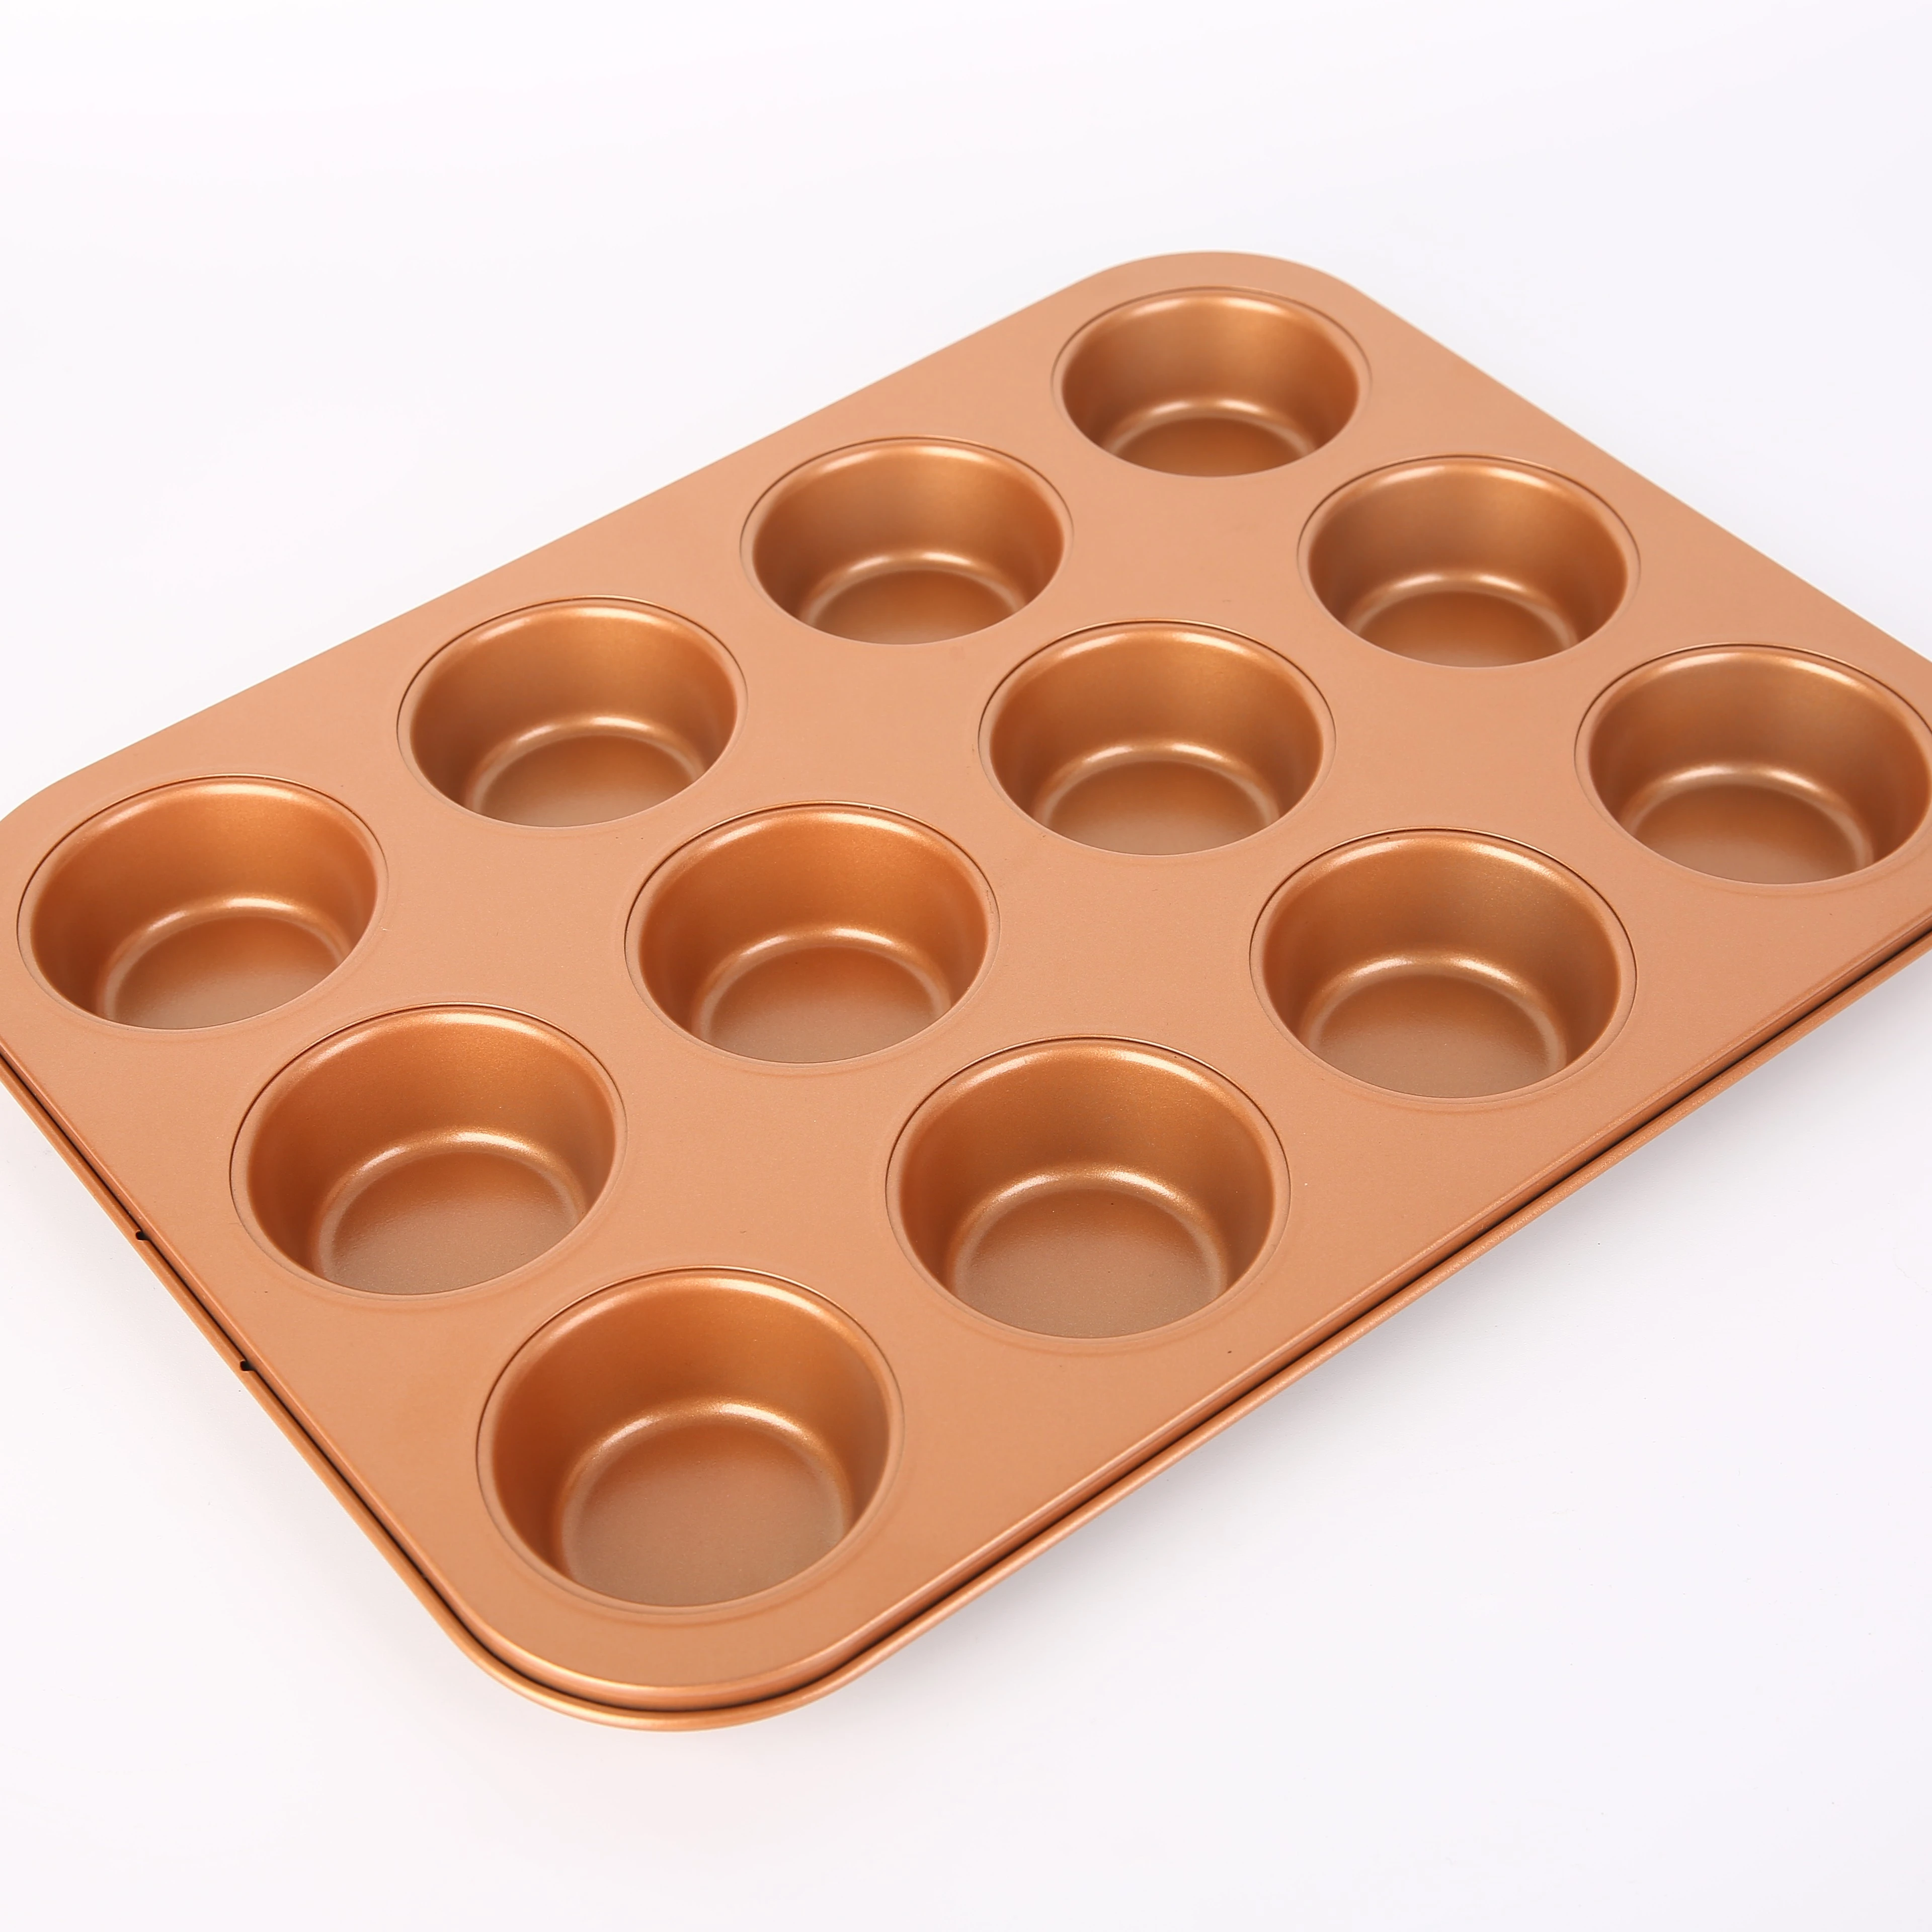 

Huxi Carbon Steel Non-Stick Custom Black Bakeware 12 Cup Muffin Pan,Cupcake Baking Tray for Oven